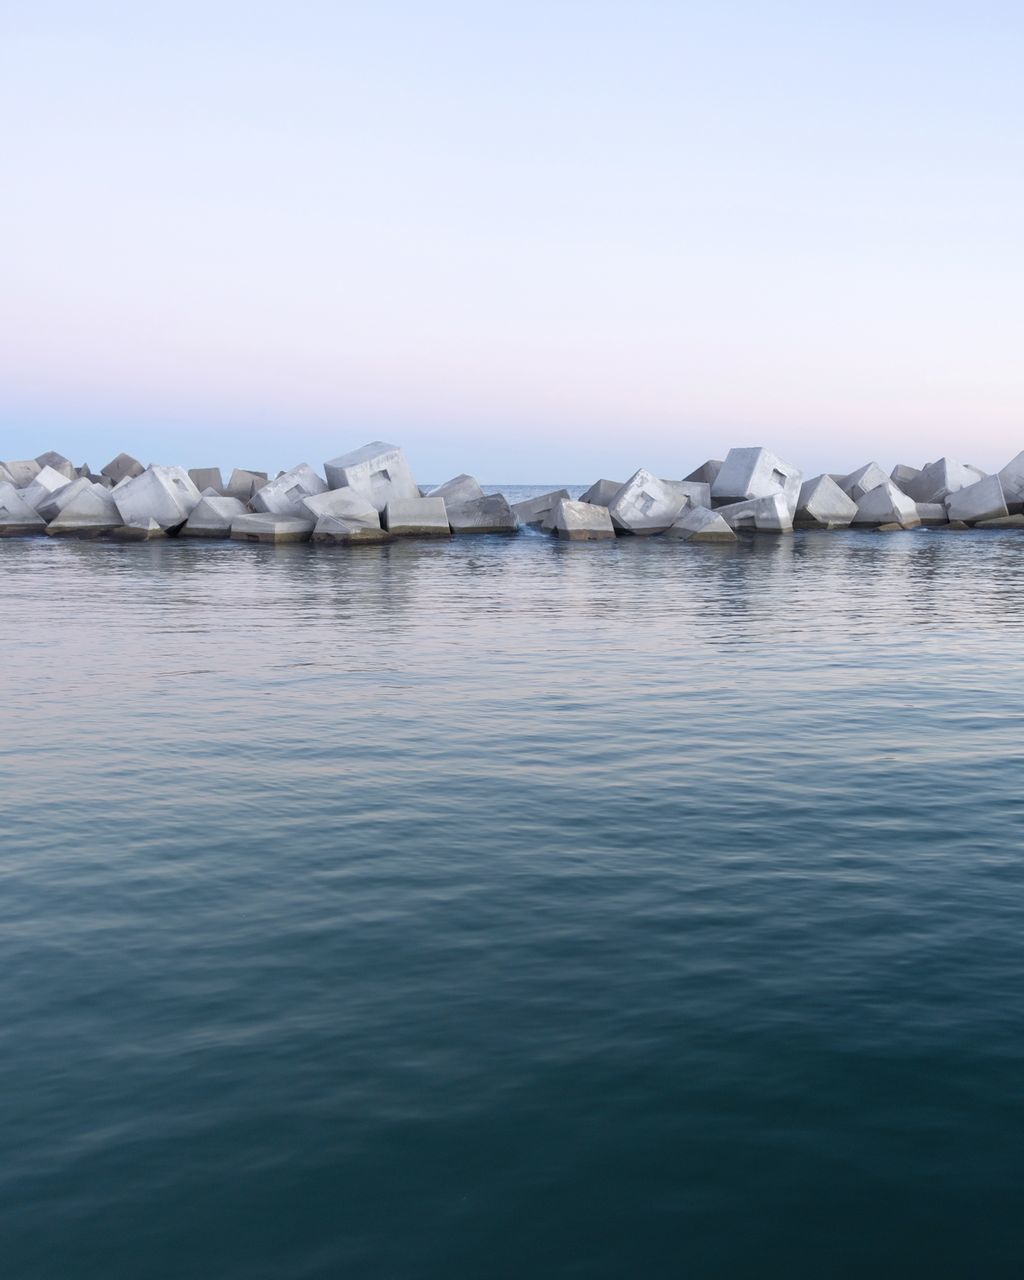 water, waterfront, cold temperature, tranquility, ice, tranquil scene, scenics - nature, no people, sky, beauty in nature, winter, nature, day, iceberg, lake, floating, rippled, copy space, glacier, floating on water, outdoors, melting